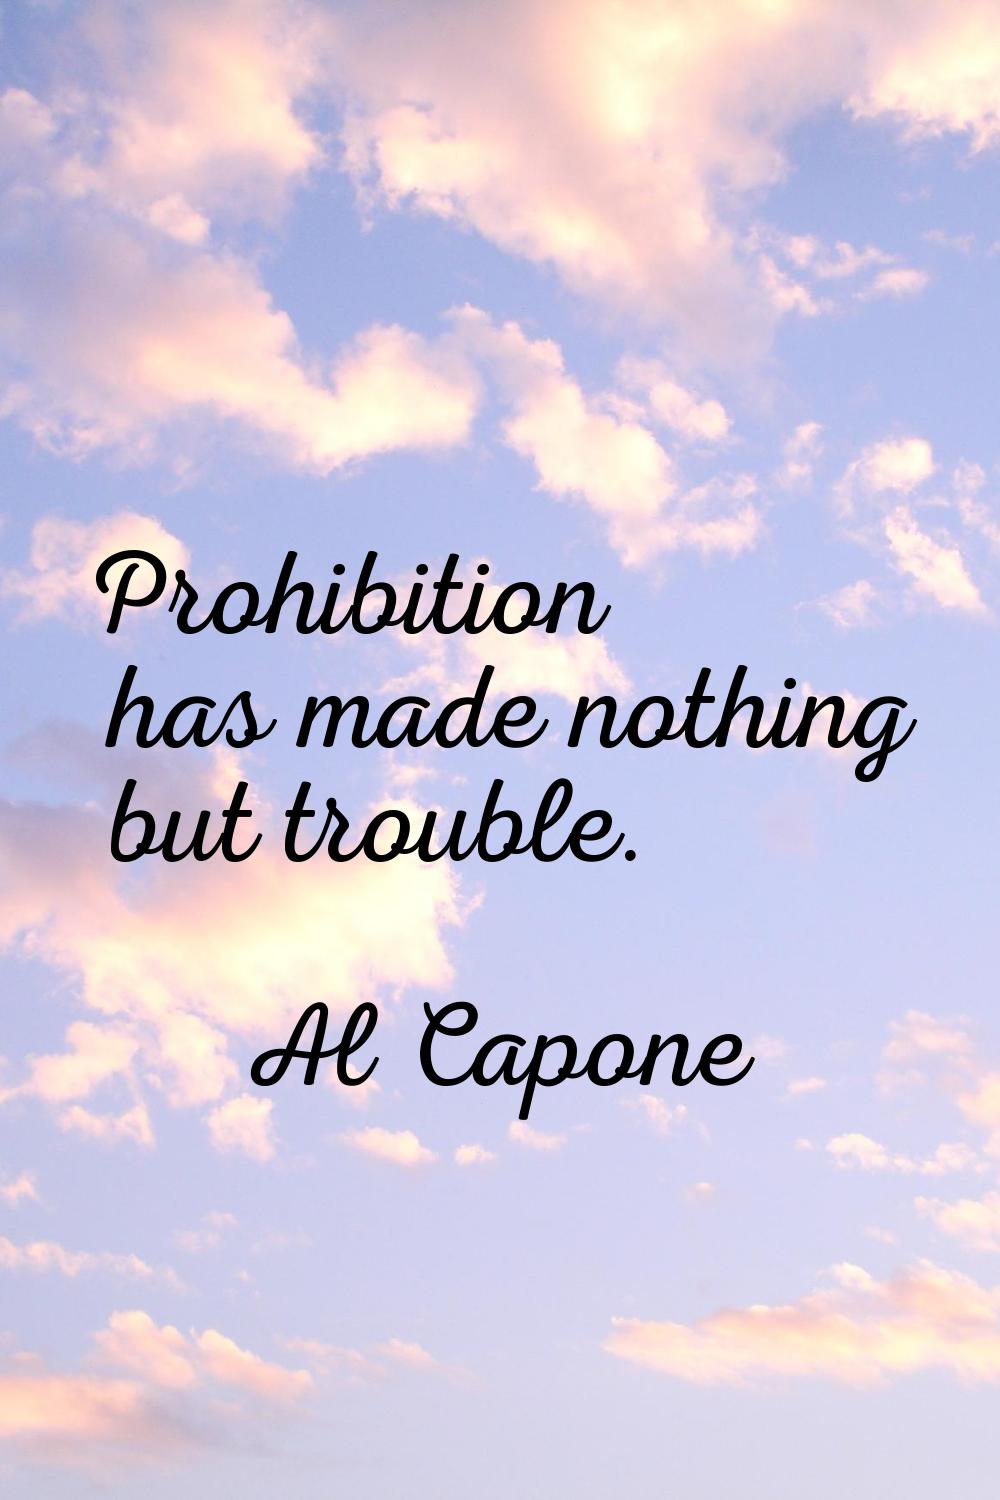 Prohibition has made nothing but trouble.